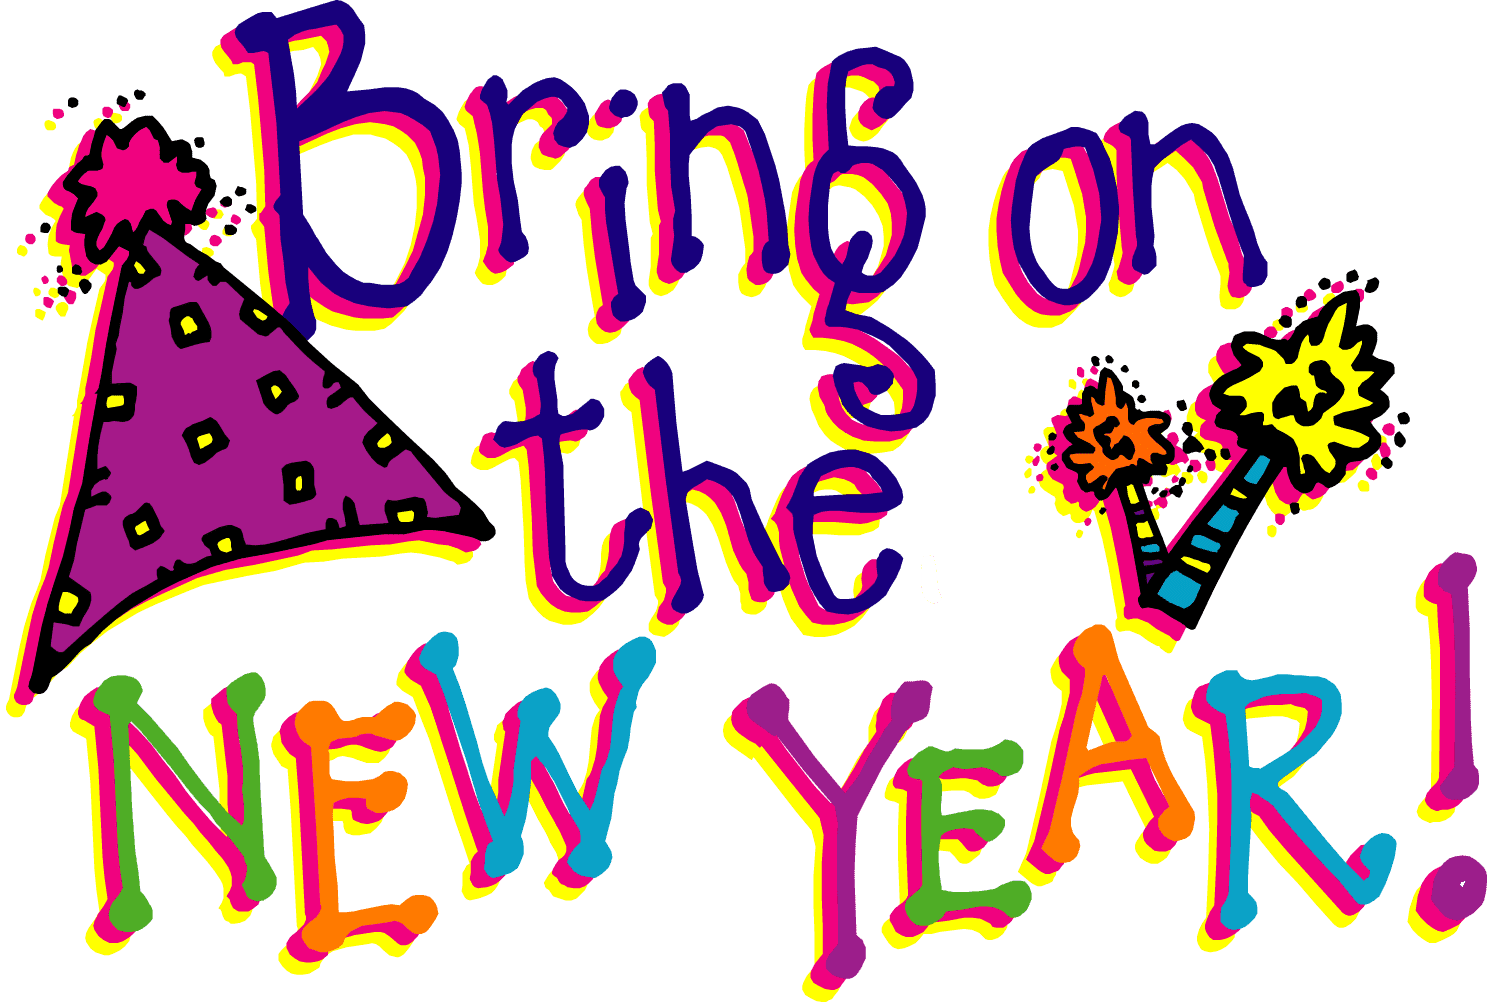 new years clipart